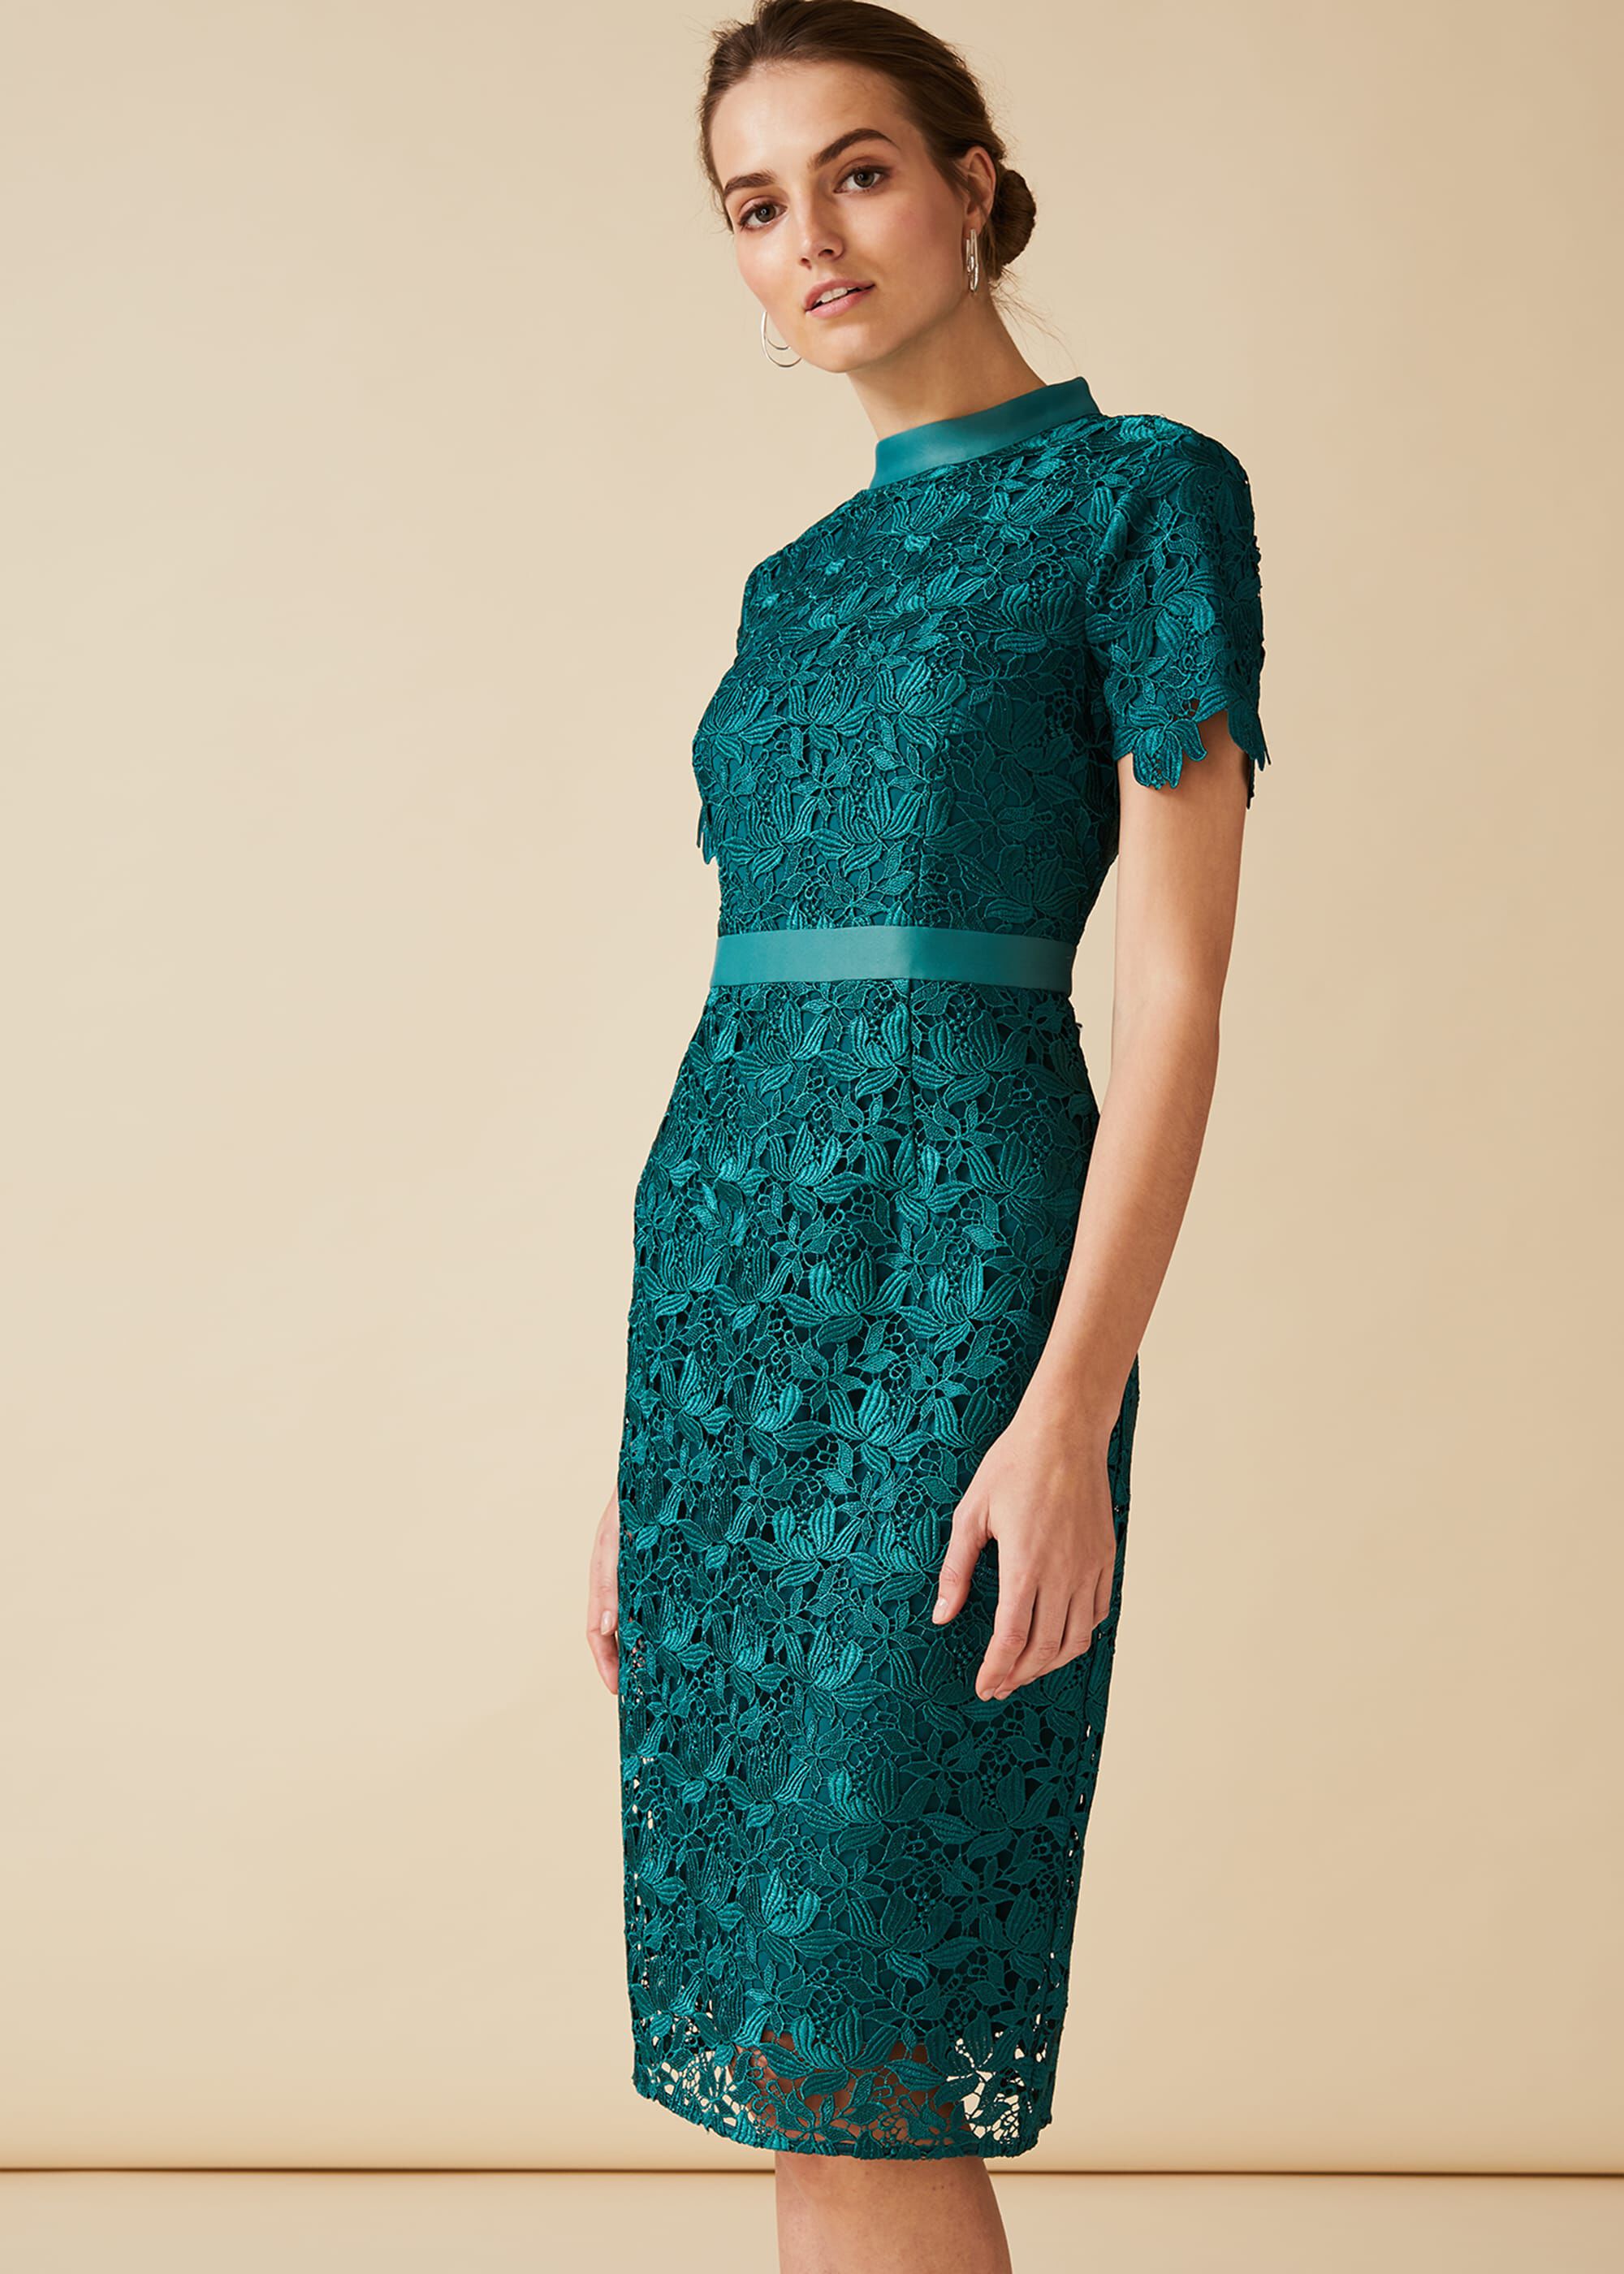 Phase Eight Lace Dress Sale Online, UP TO 60% OFF | www.ldeventos.com